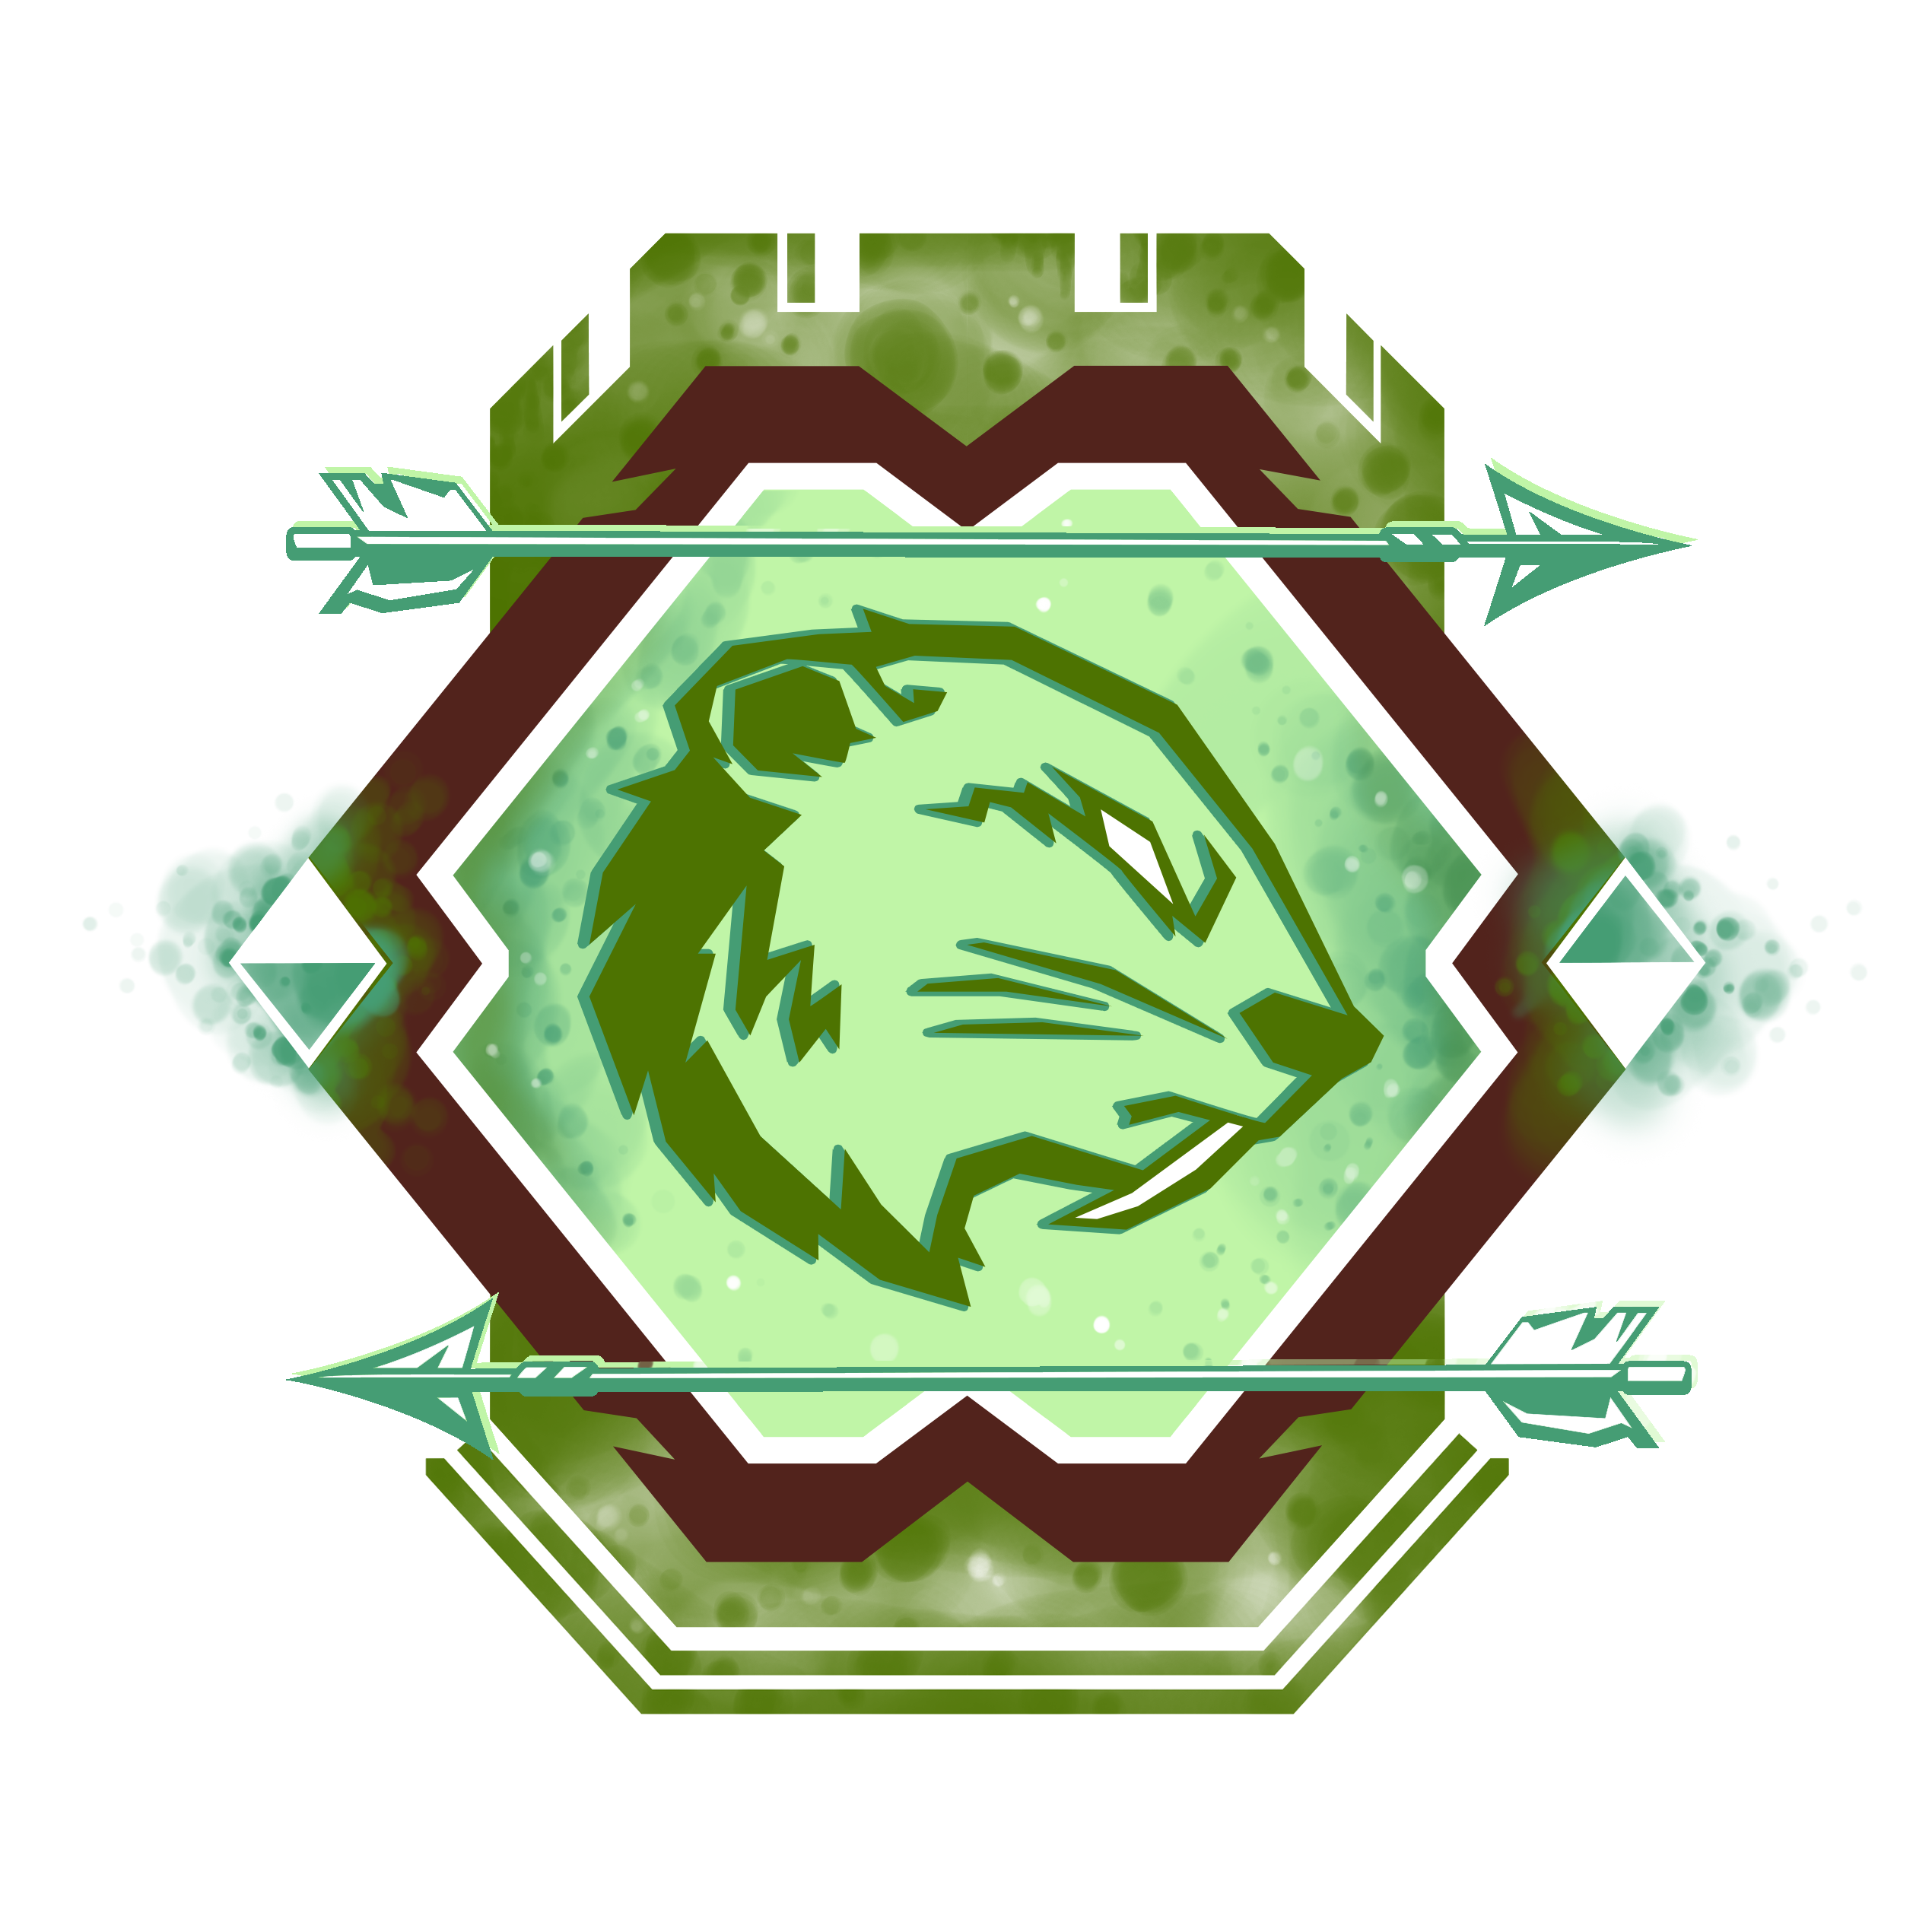 The logo of the Watchers. A beaver head is visible in a somewhat hexagon-shaped object. The logo is green, and arrows and a tower are spread across the sides of the logo.